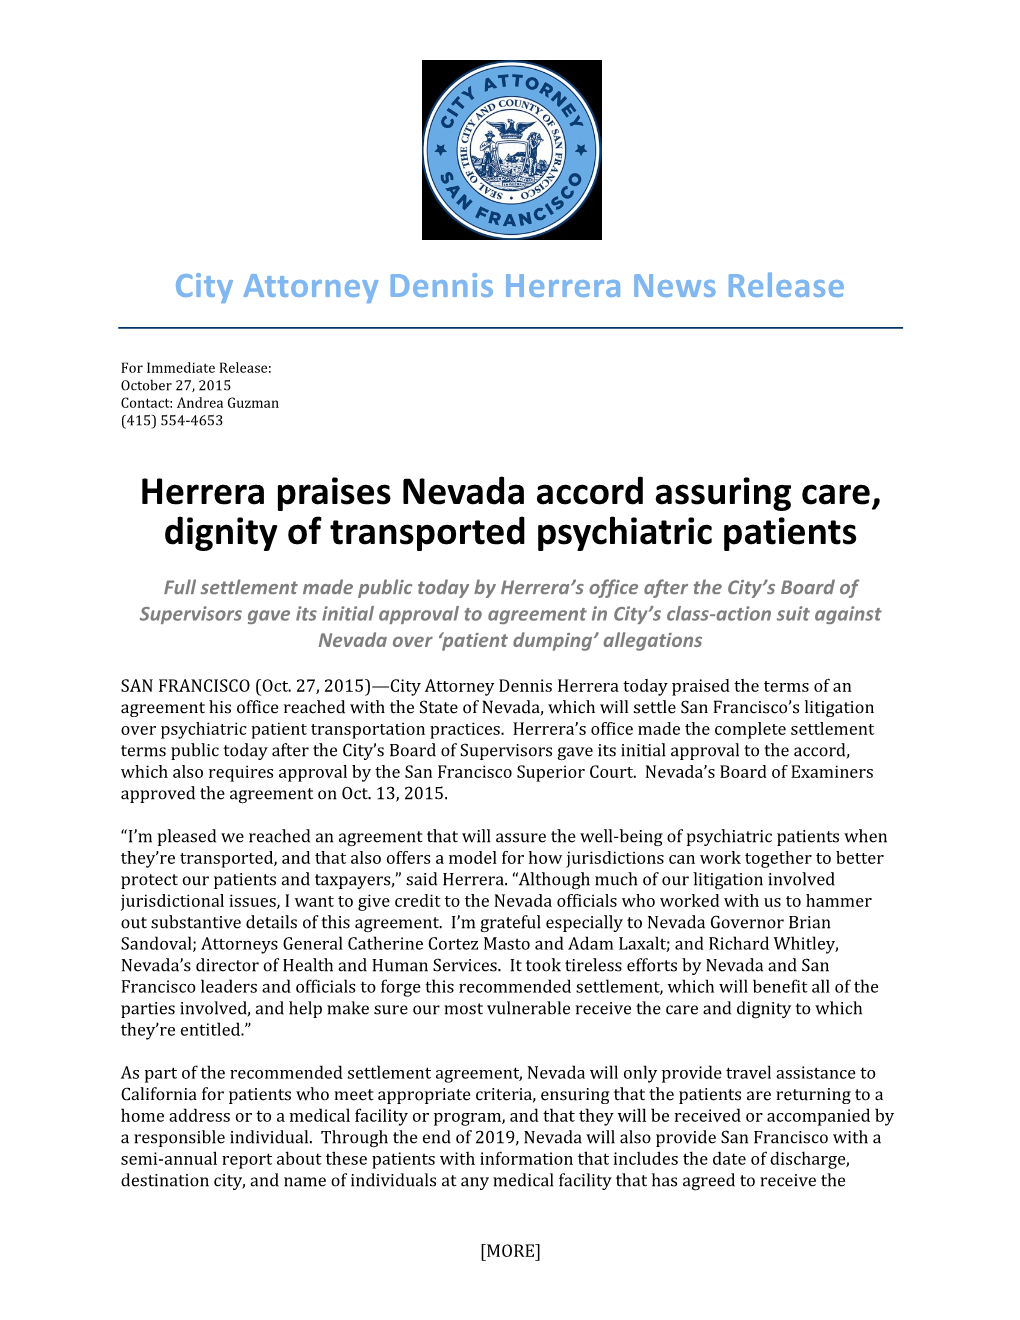 Herrera Praises Nevada Accord Assuring Care, Dignity of Transported Psychiatric Patients